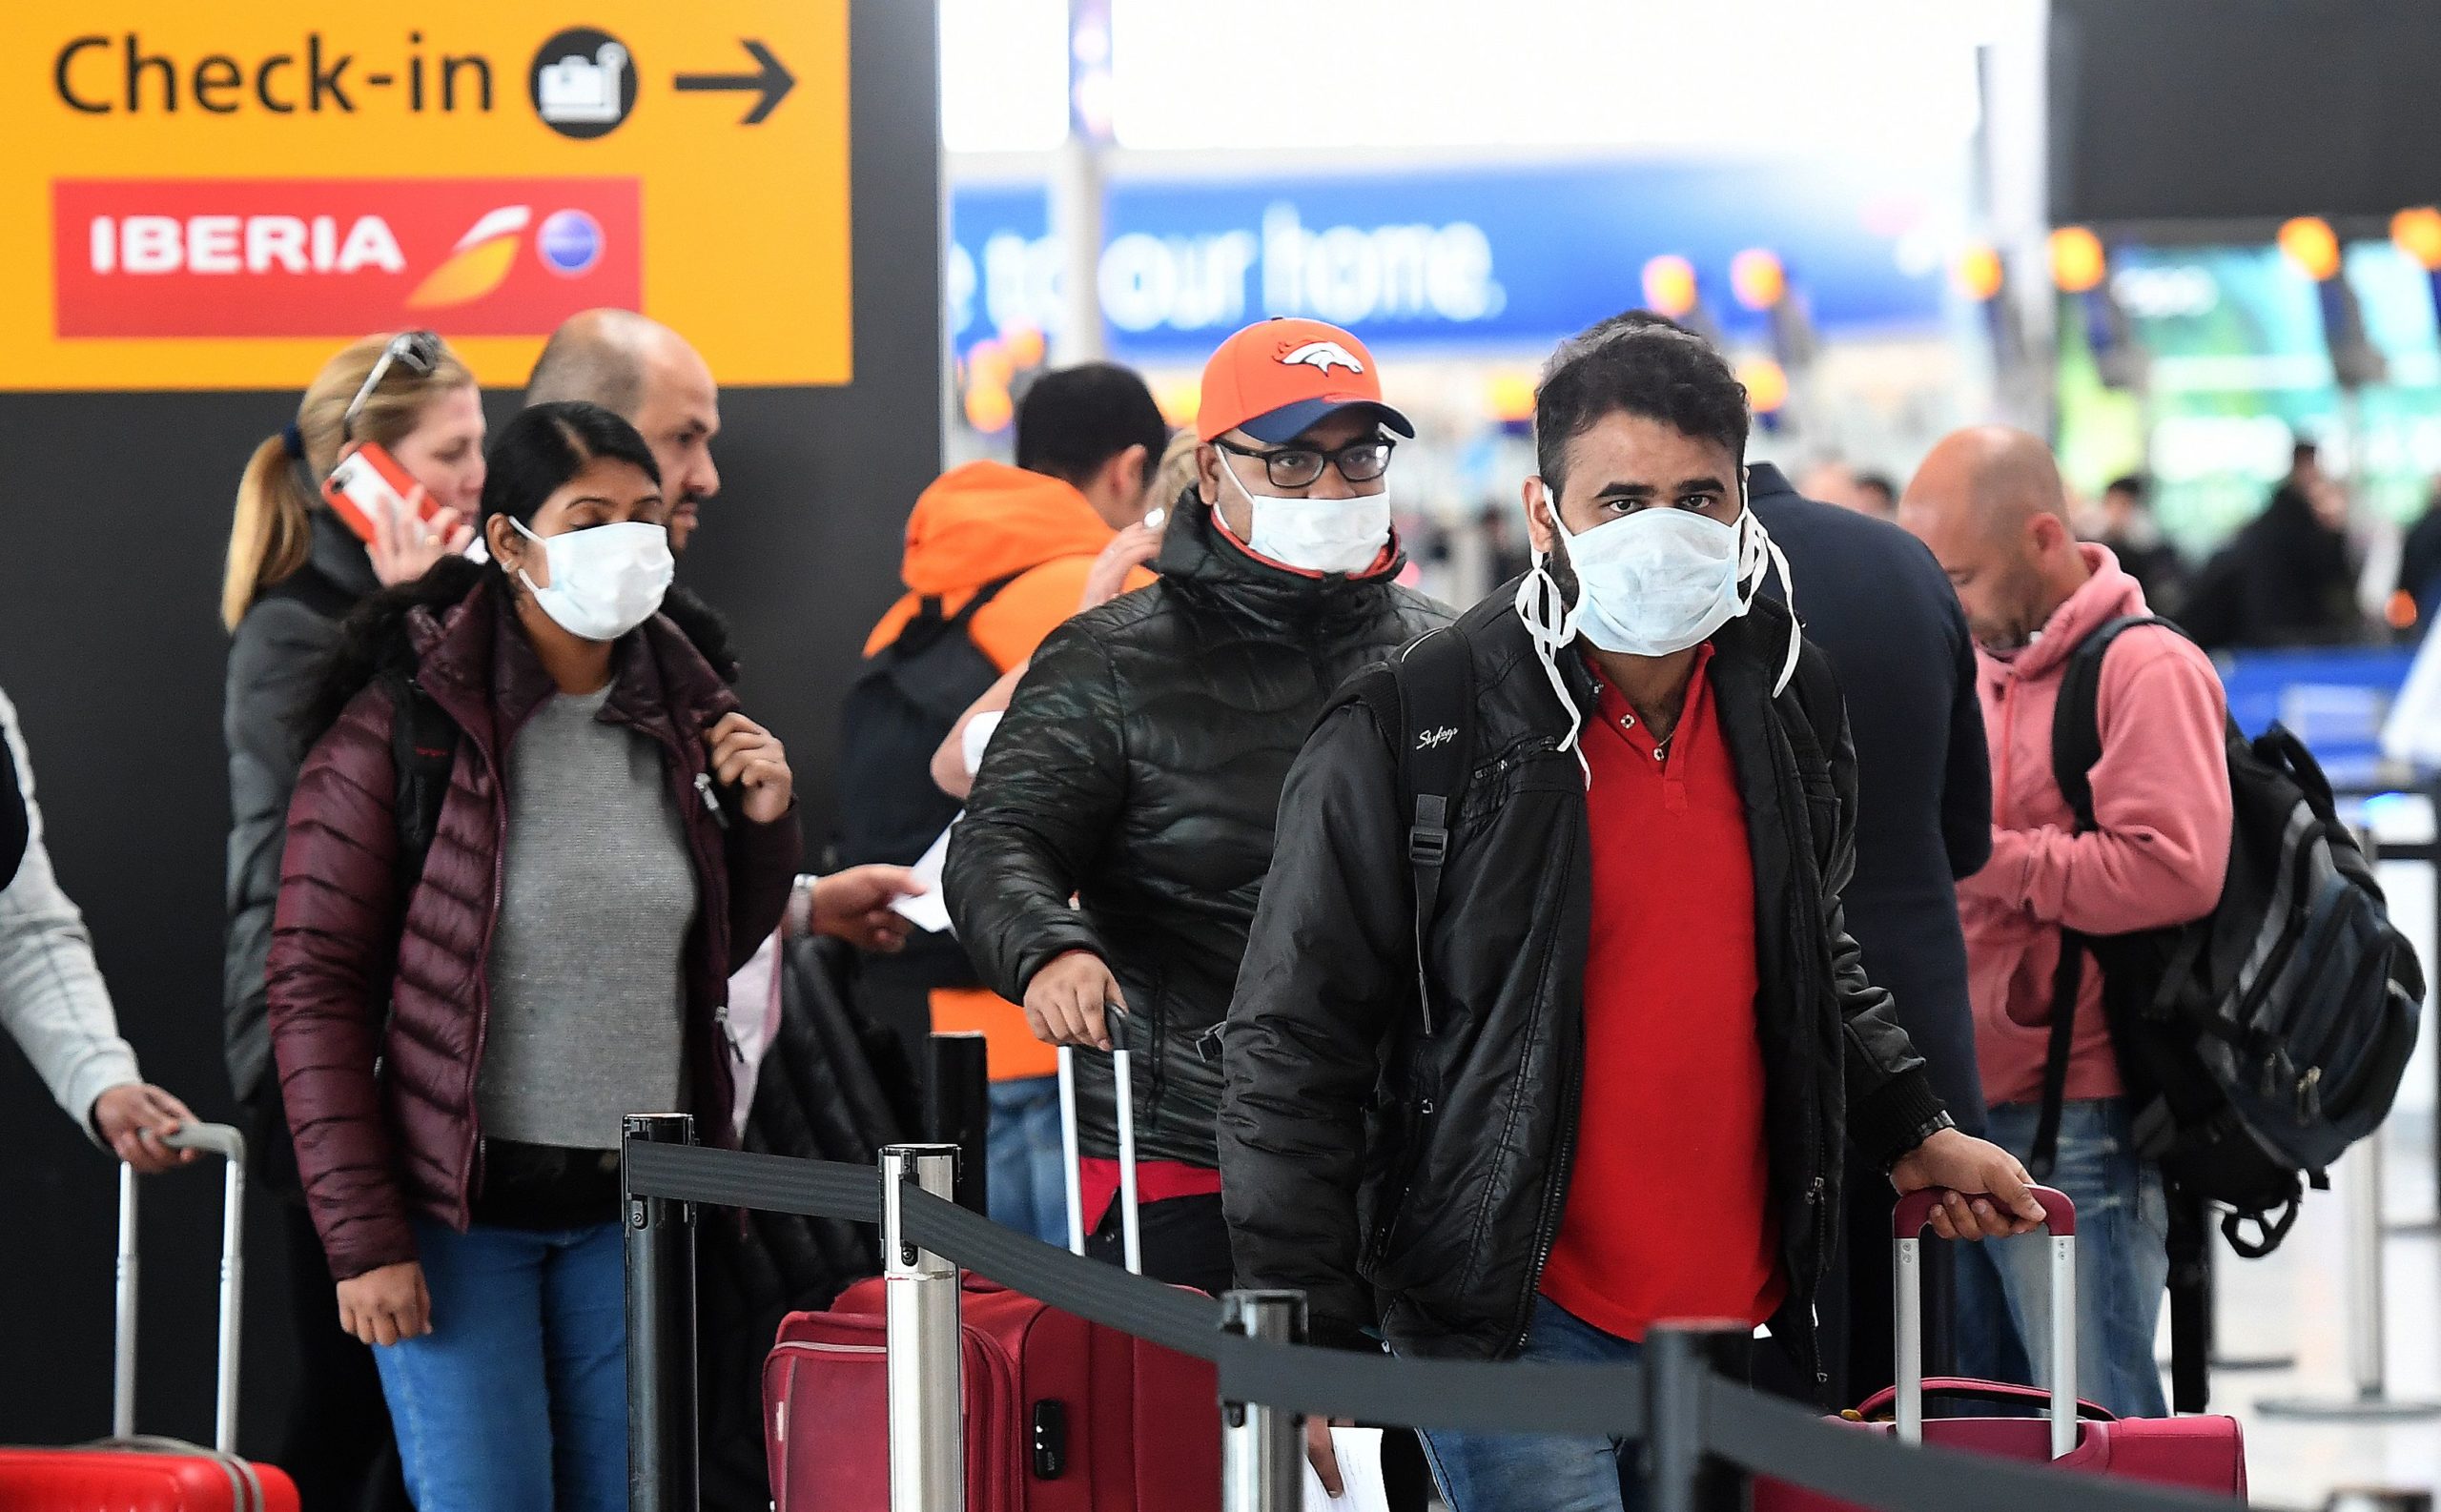 Travellers in masks queue at Heathrow airport in London as air travel grinds to a halt and nations                  across the world lock down their borders due to the coronavirus pandemic